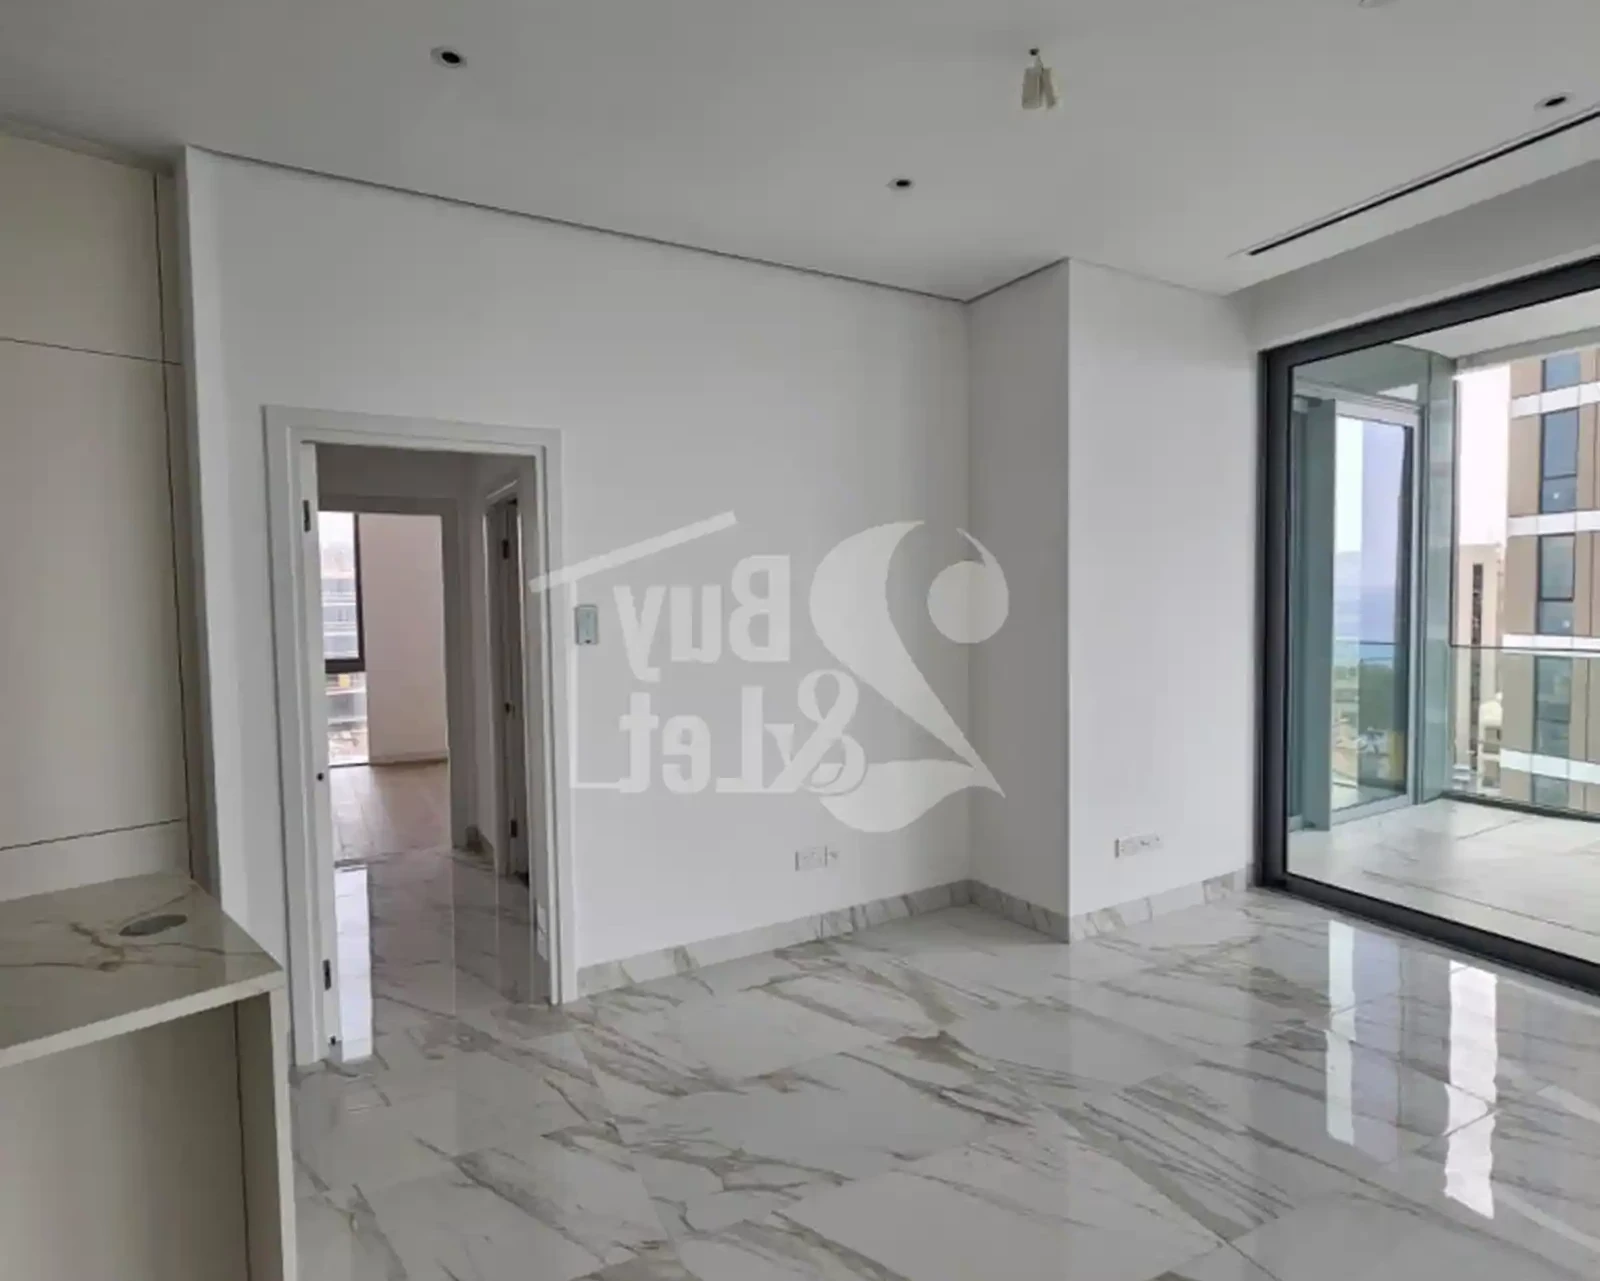 3-bedroom apartment fоr sаle €1.450.000, image 1